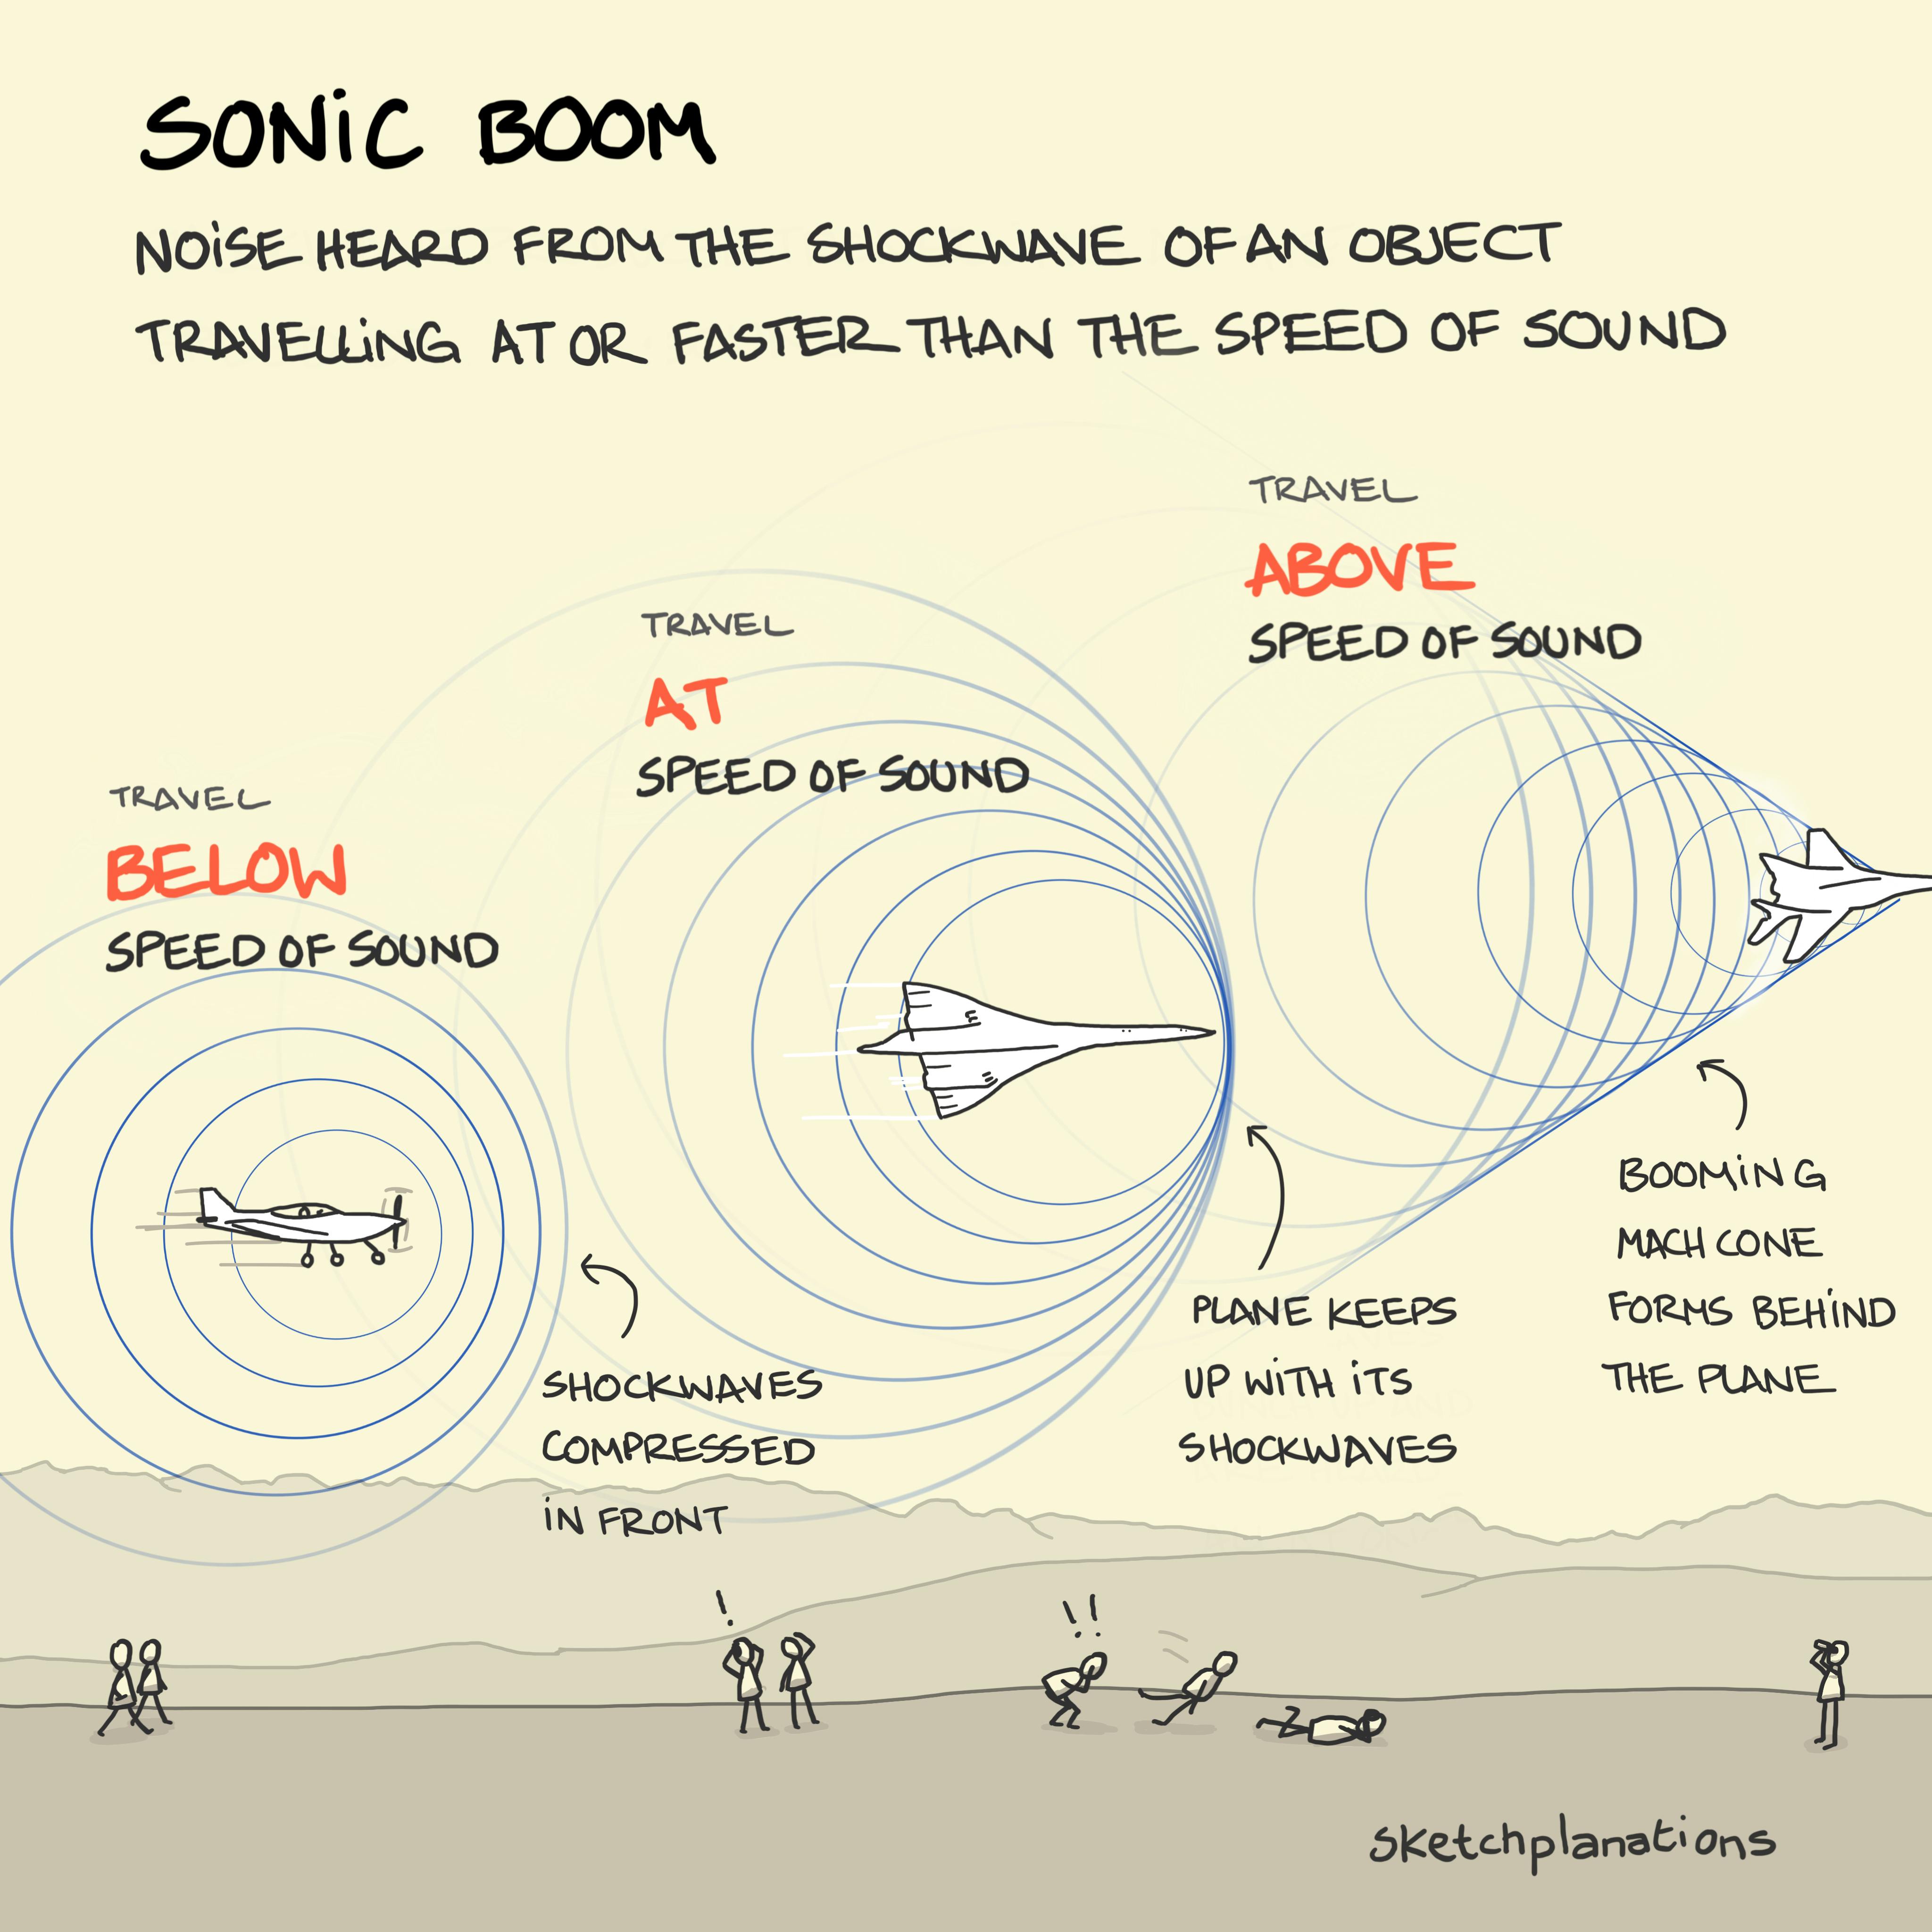 The real Sonic Boom